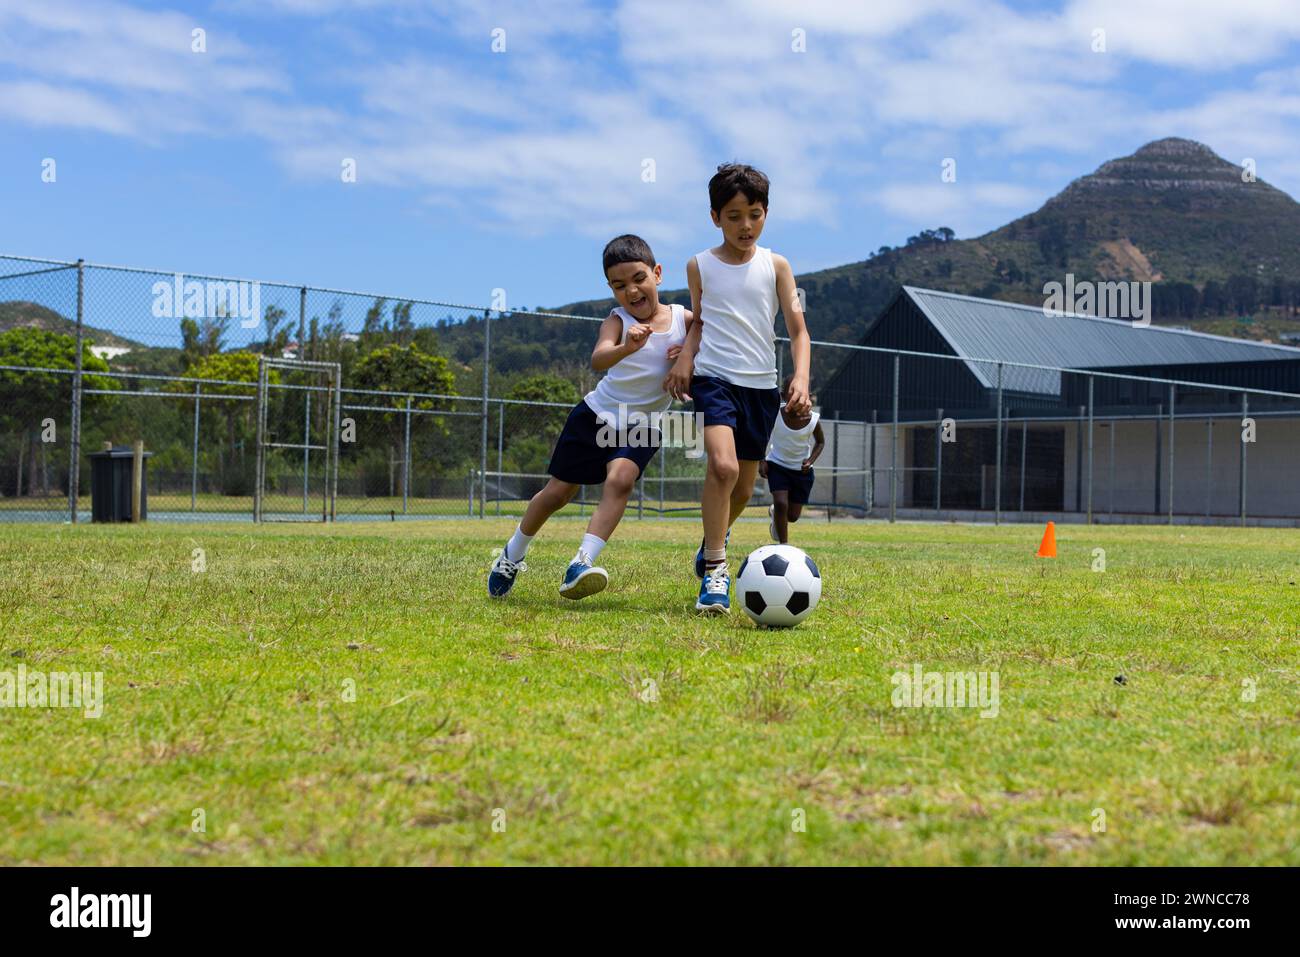 Two boys are playing soccer on a sunny day in school, with one chasing the ball Stock Photo